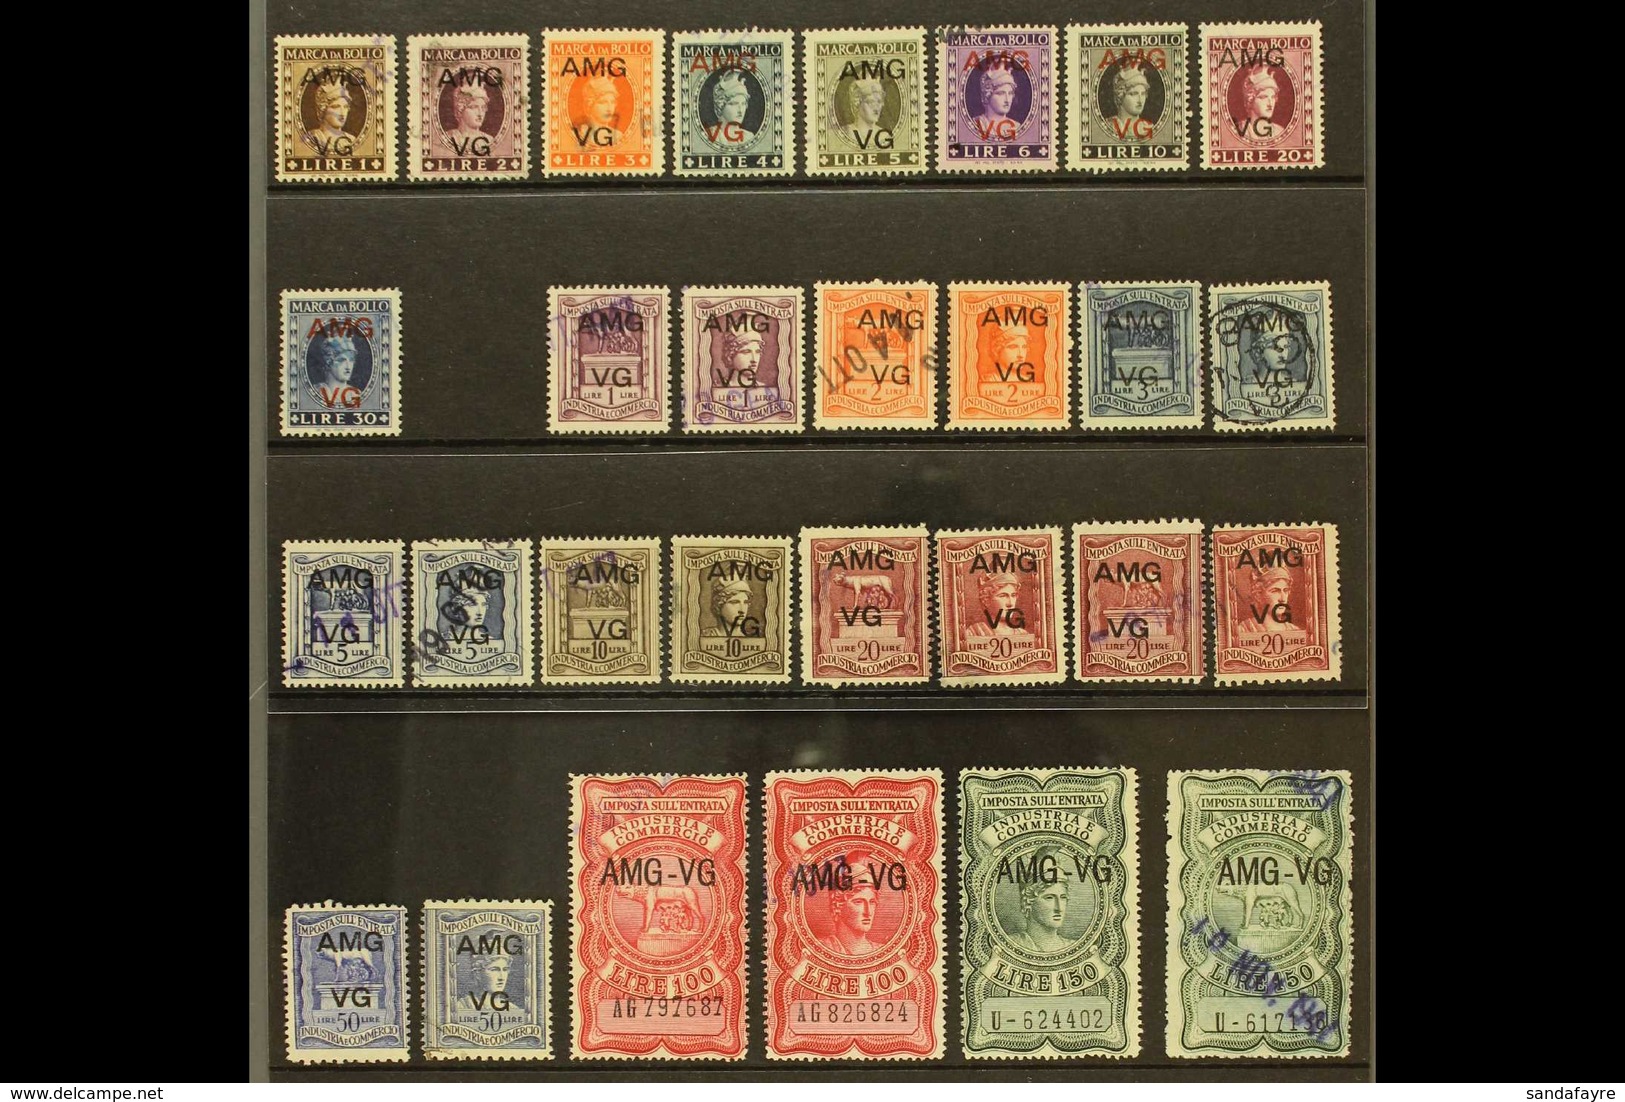 VENEZIA GIULIA REVENUE STAMPS 1940's Fine Used Collection Of Various "AMG / VG" Overprinted Italian Revenues, Inc Marca  - Ohne Zuordnung